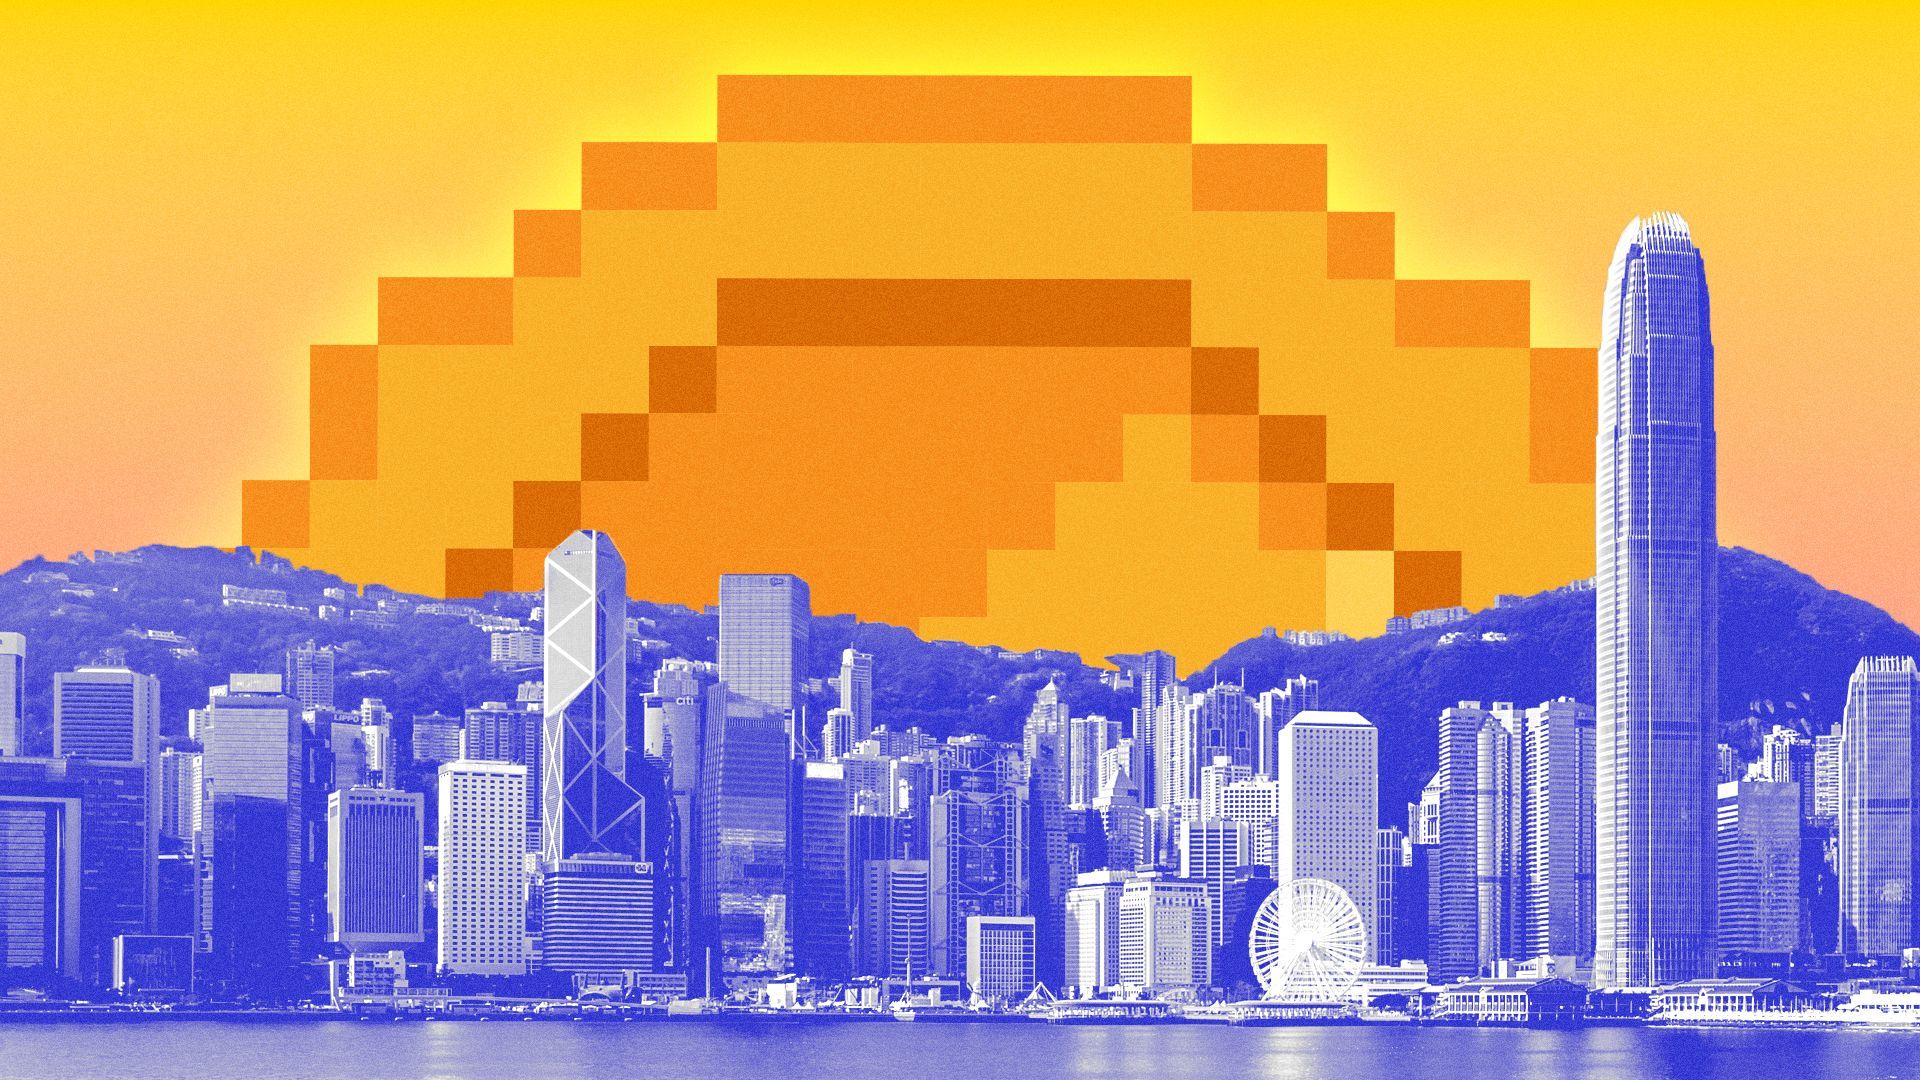 Illustration of a pixelated coin behind Hong Kong's skyline.